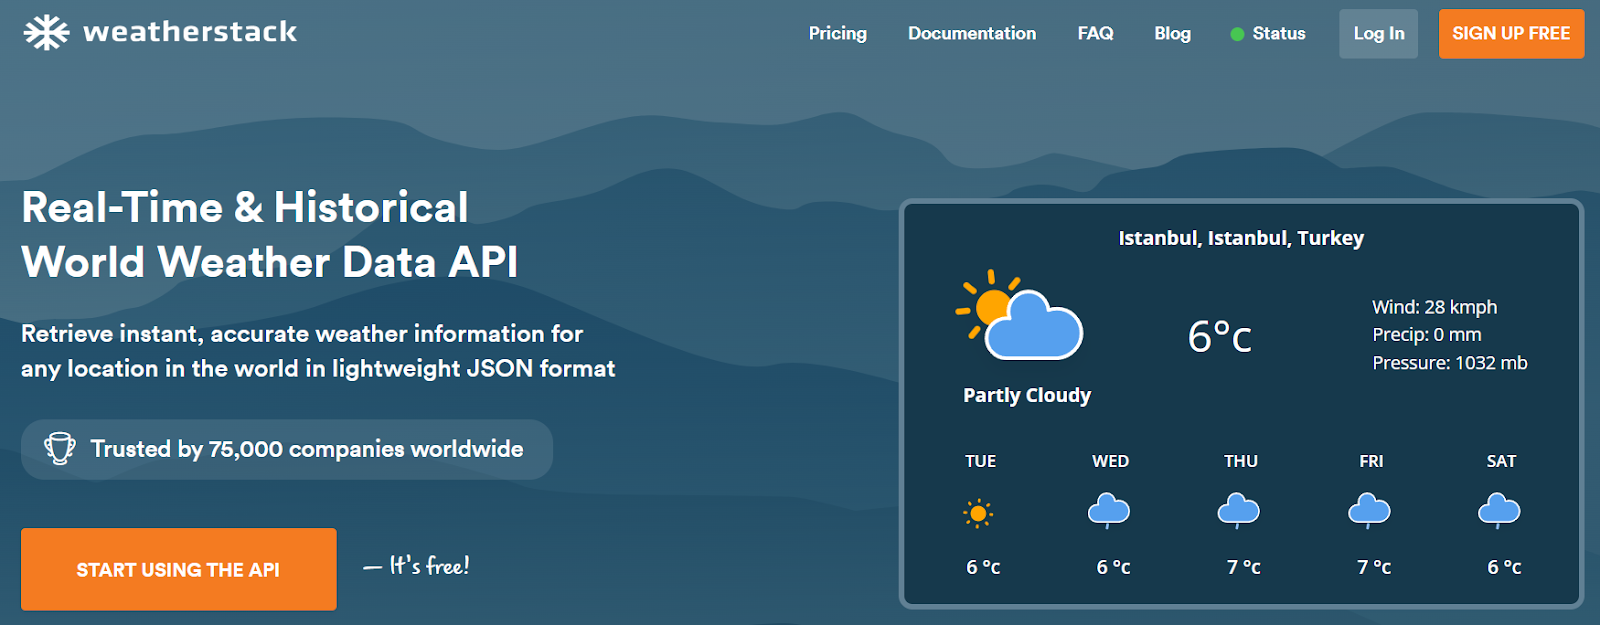 home page of the weatherstack weather forecast api free